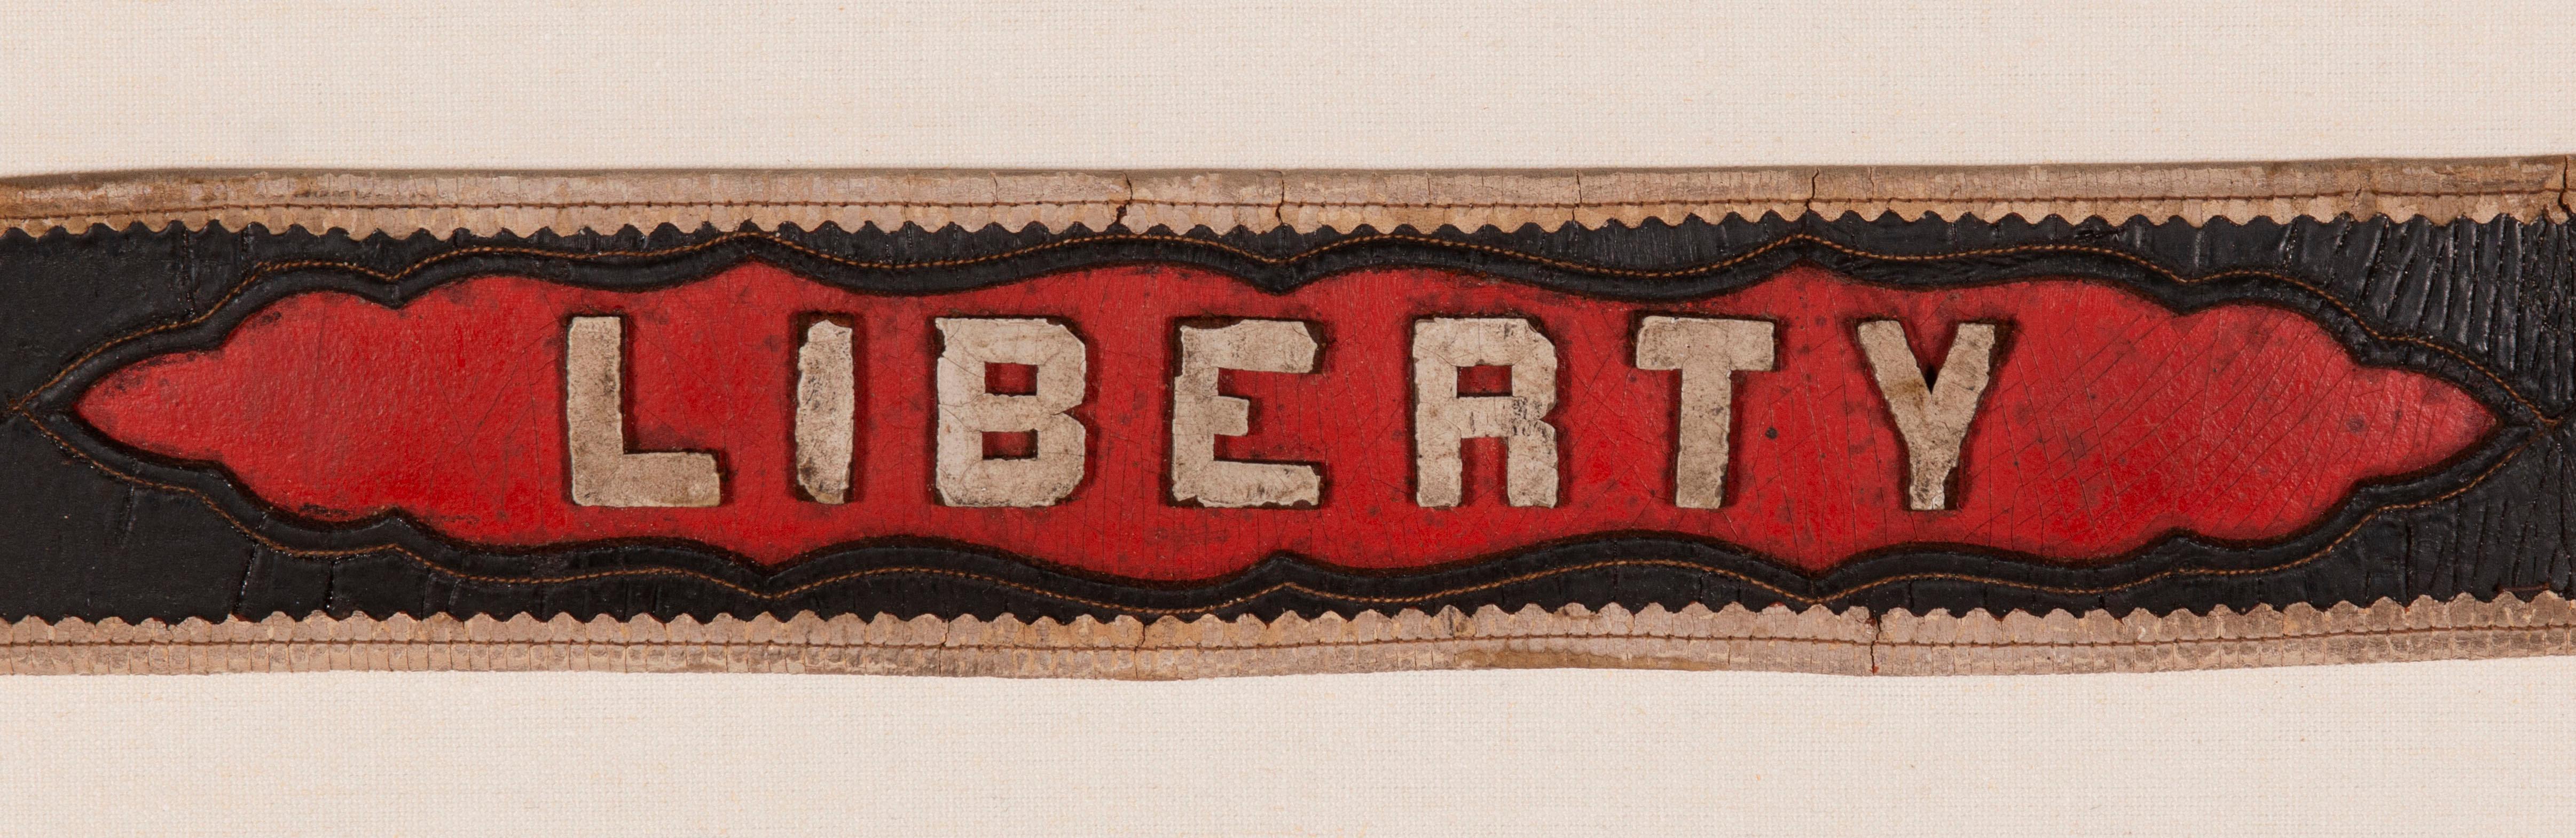 Leather fireman's parade belt with the word 